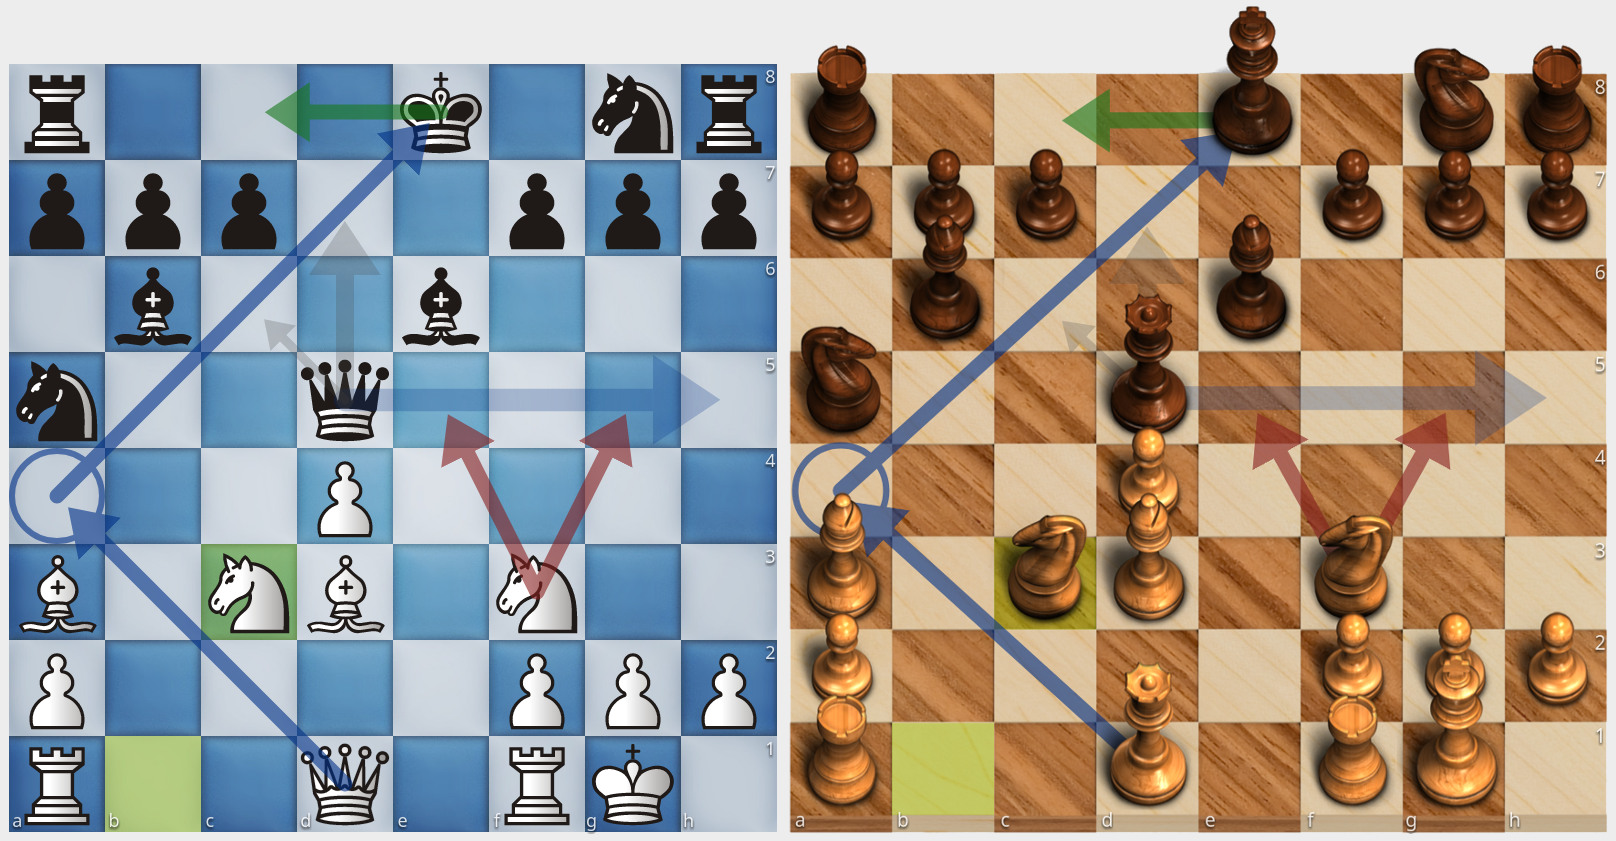 Chessground in 2D and 3D